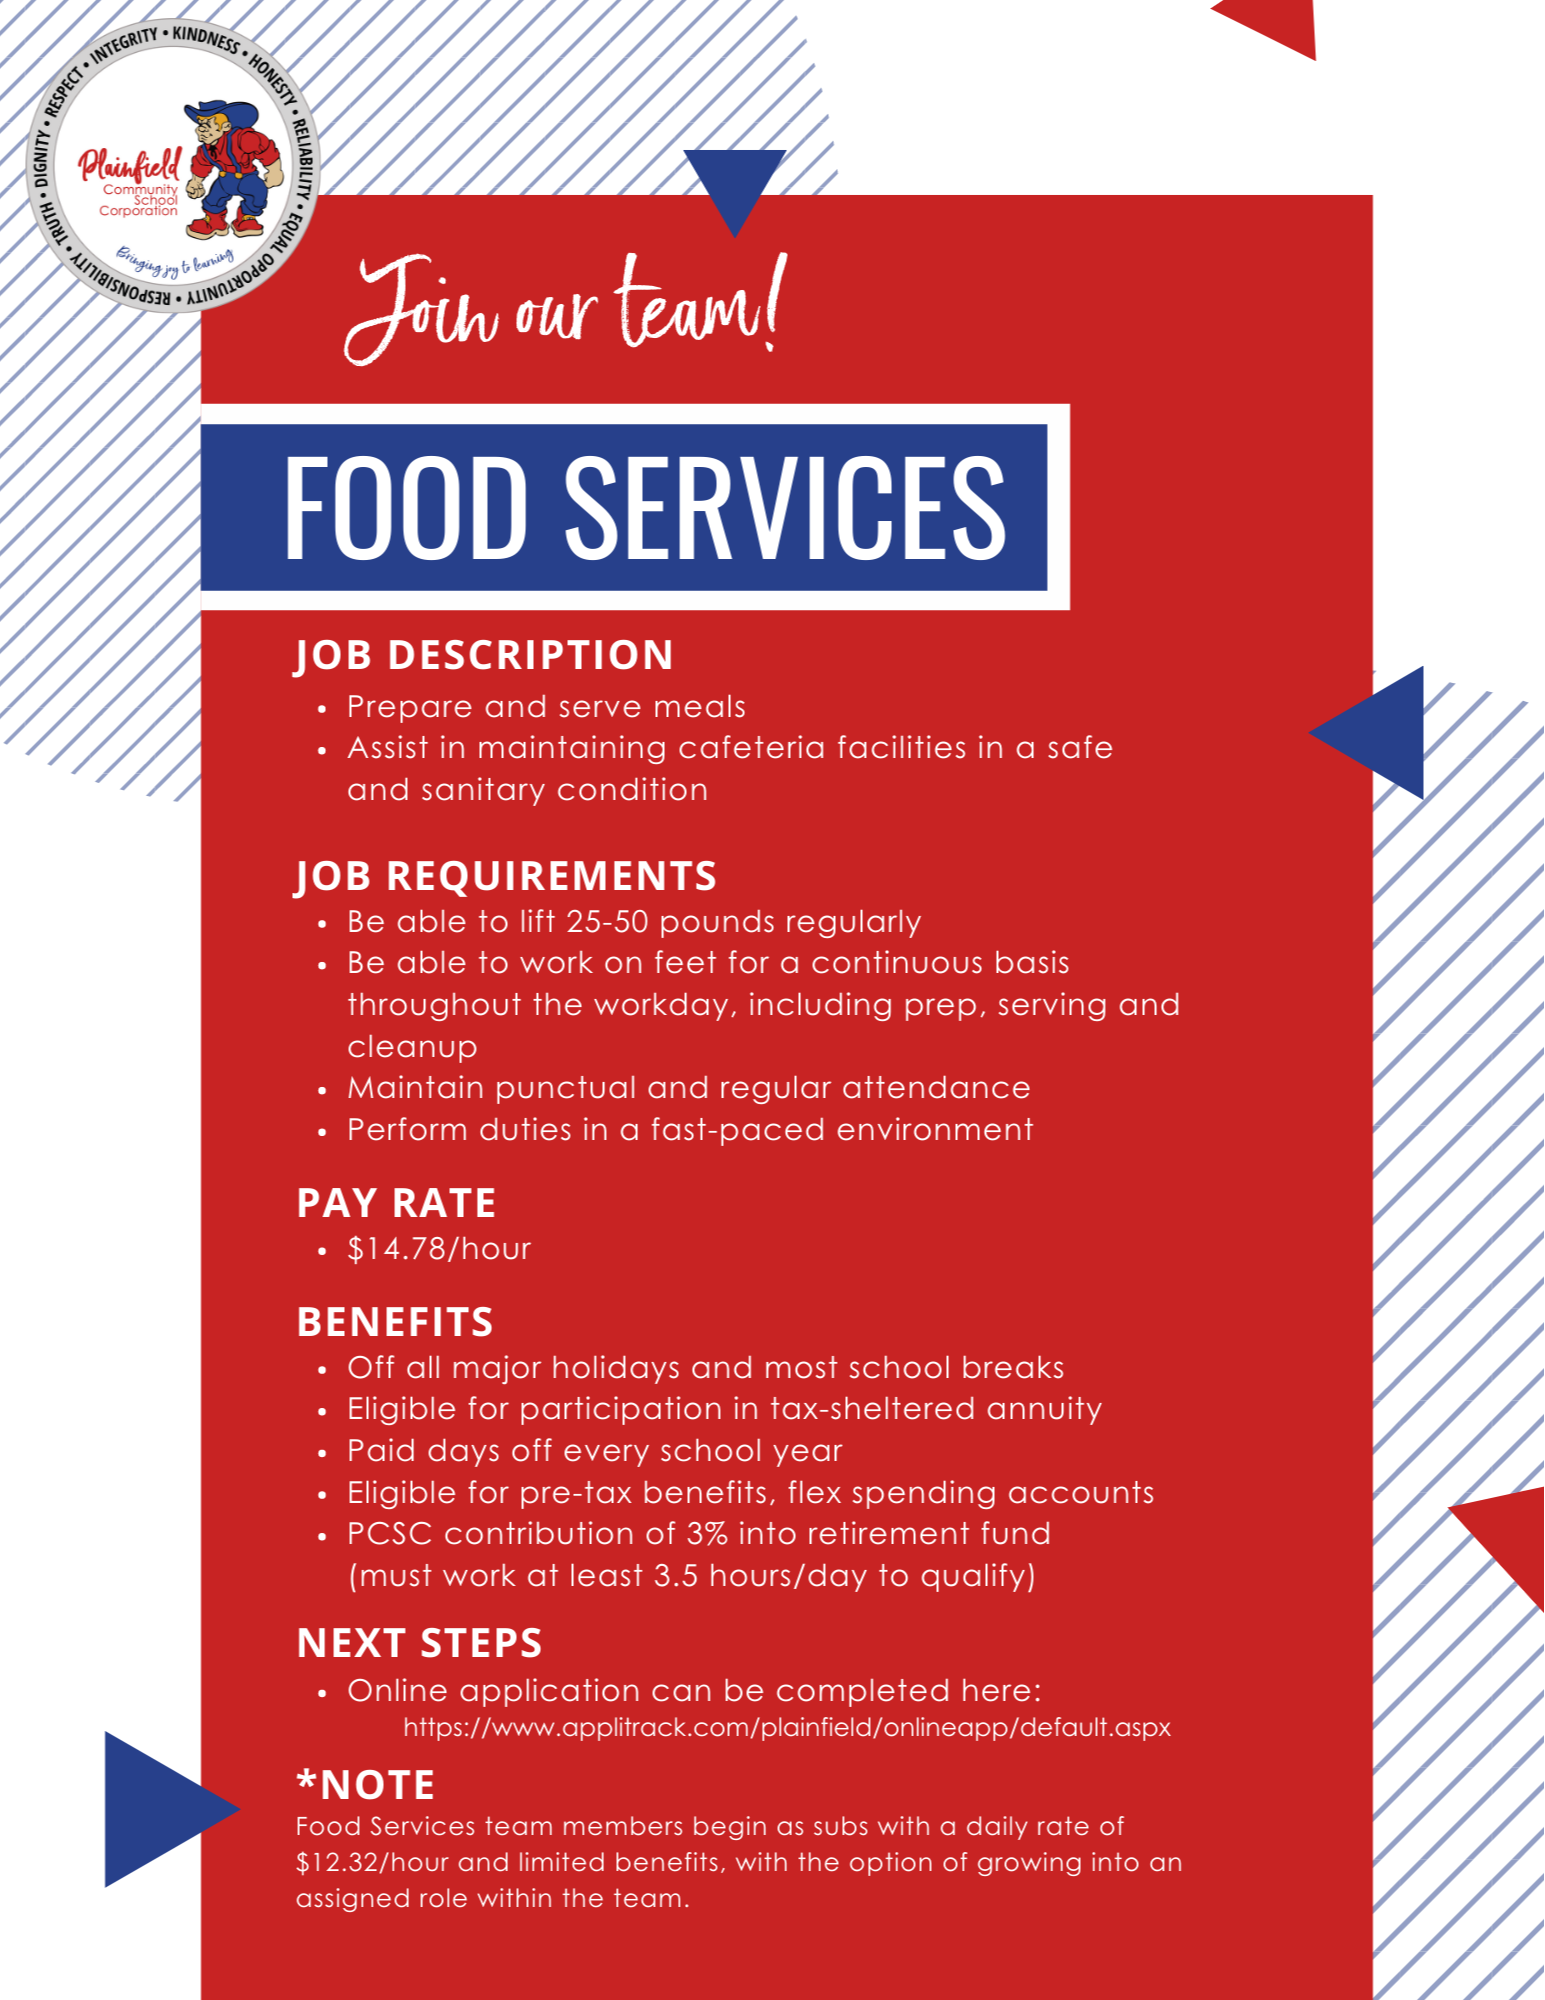 Details about being a part of the Plainfield Schools Food Services team